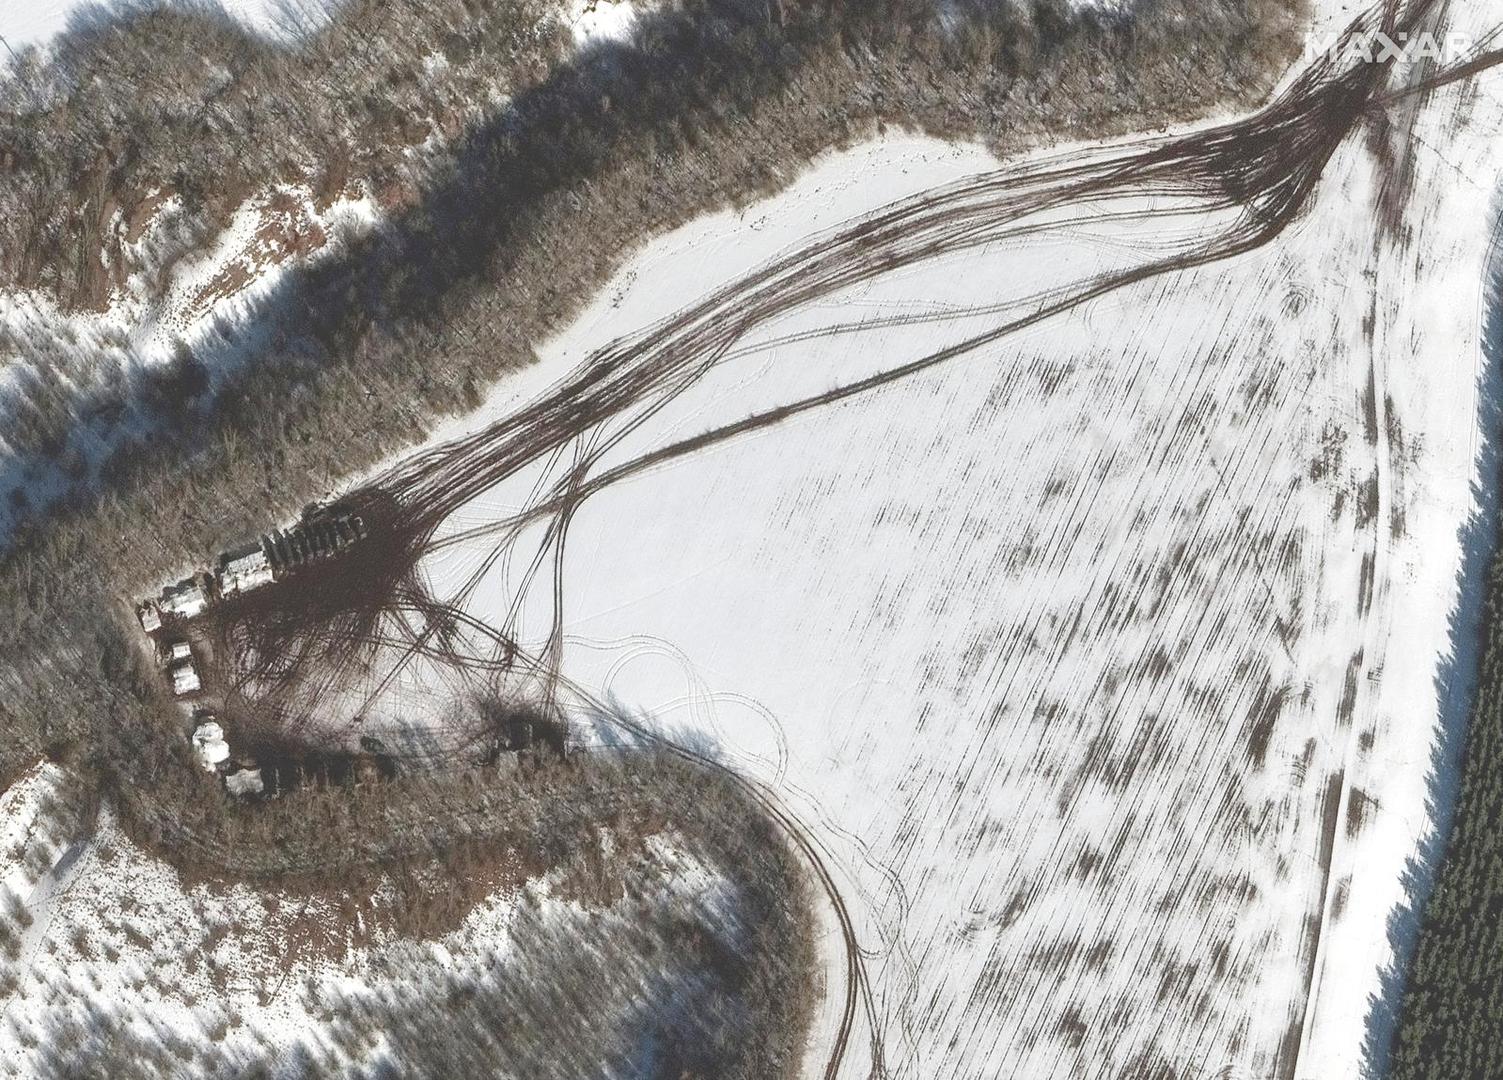 A satellite image shows deployment along a tree line, near Belgorod, Russia February 20, 2022. Maxar Technologies/Handout via REUTERS ATTENTION EDITORS - THIS IMAGE HAS BEEN SUPPLIED BY A THIRD PARTY. NO RESALES. NO ARCHIVES. MANDATORY CREDIT. DO NOT OBSCURE LOGO Photo: MAXAR TECHNOLOGIES/REUTERS